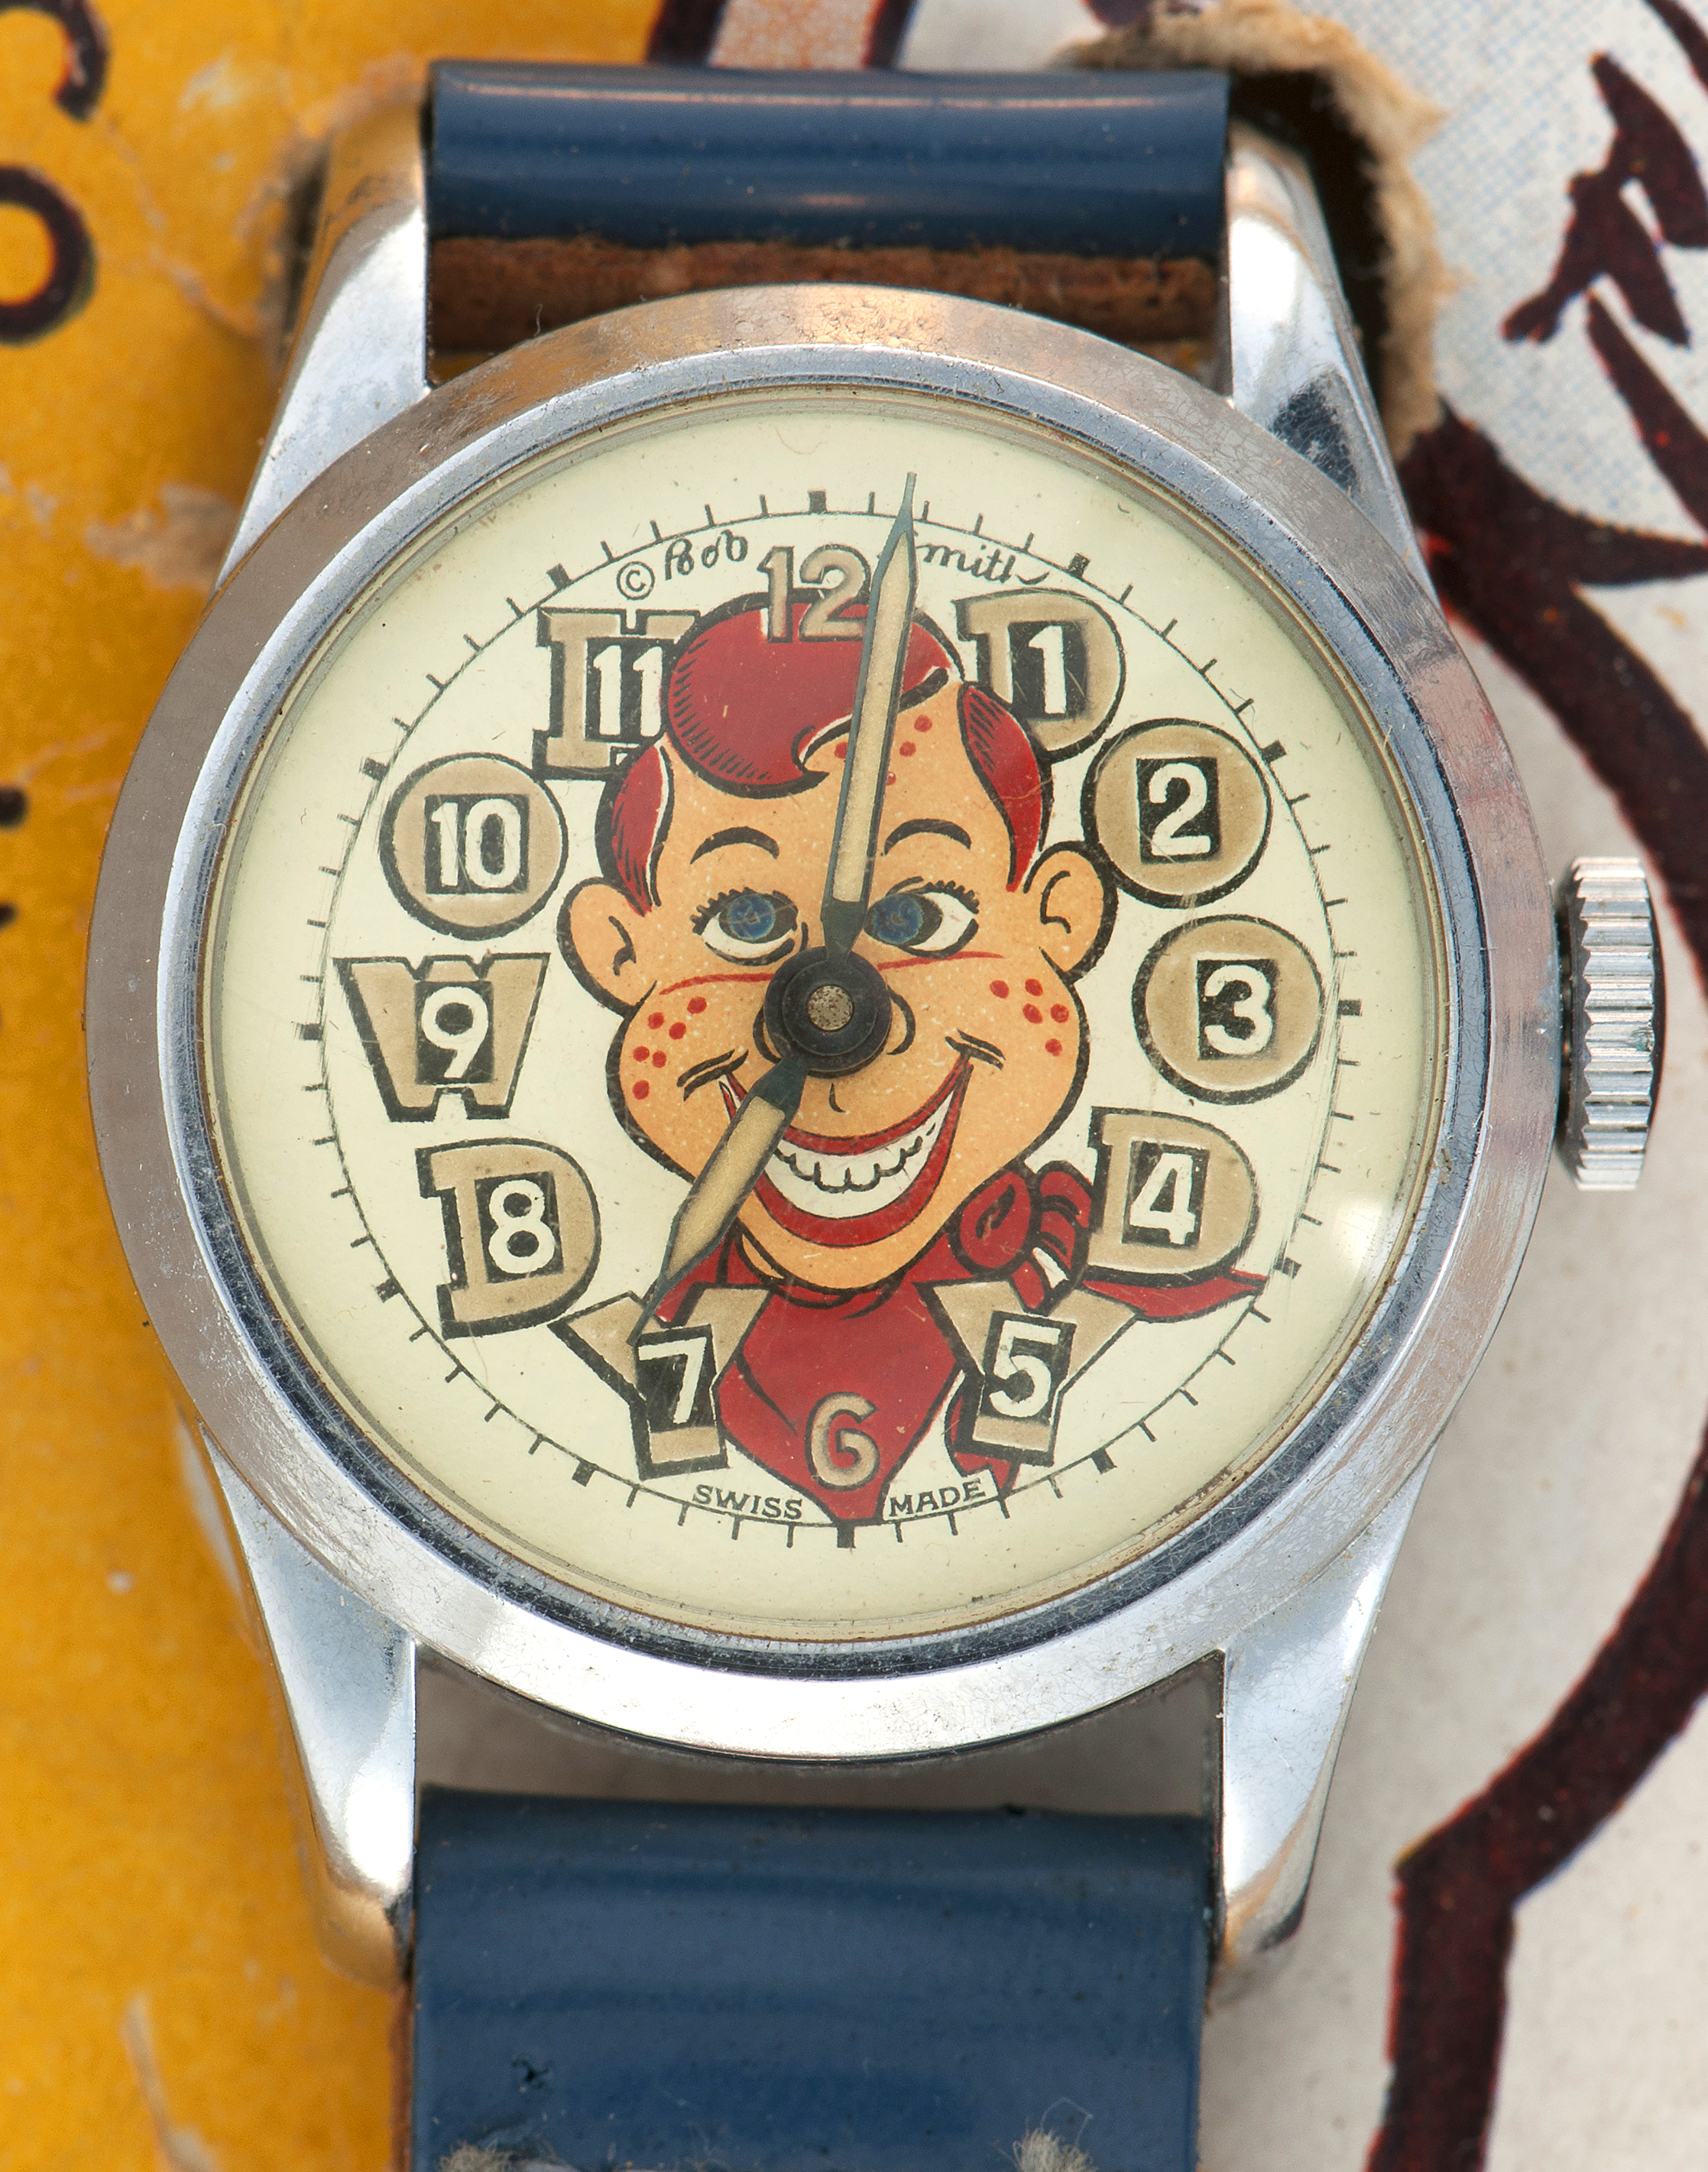 Howdy, Christian ‹ Strickland Vintage Watches